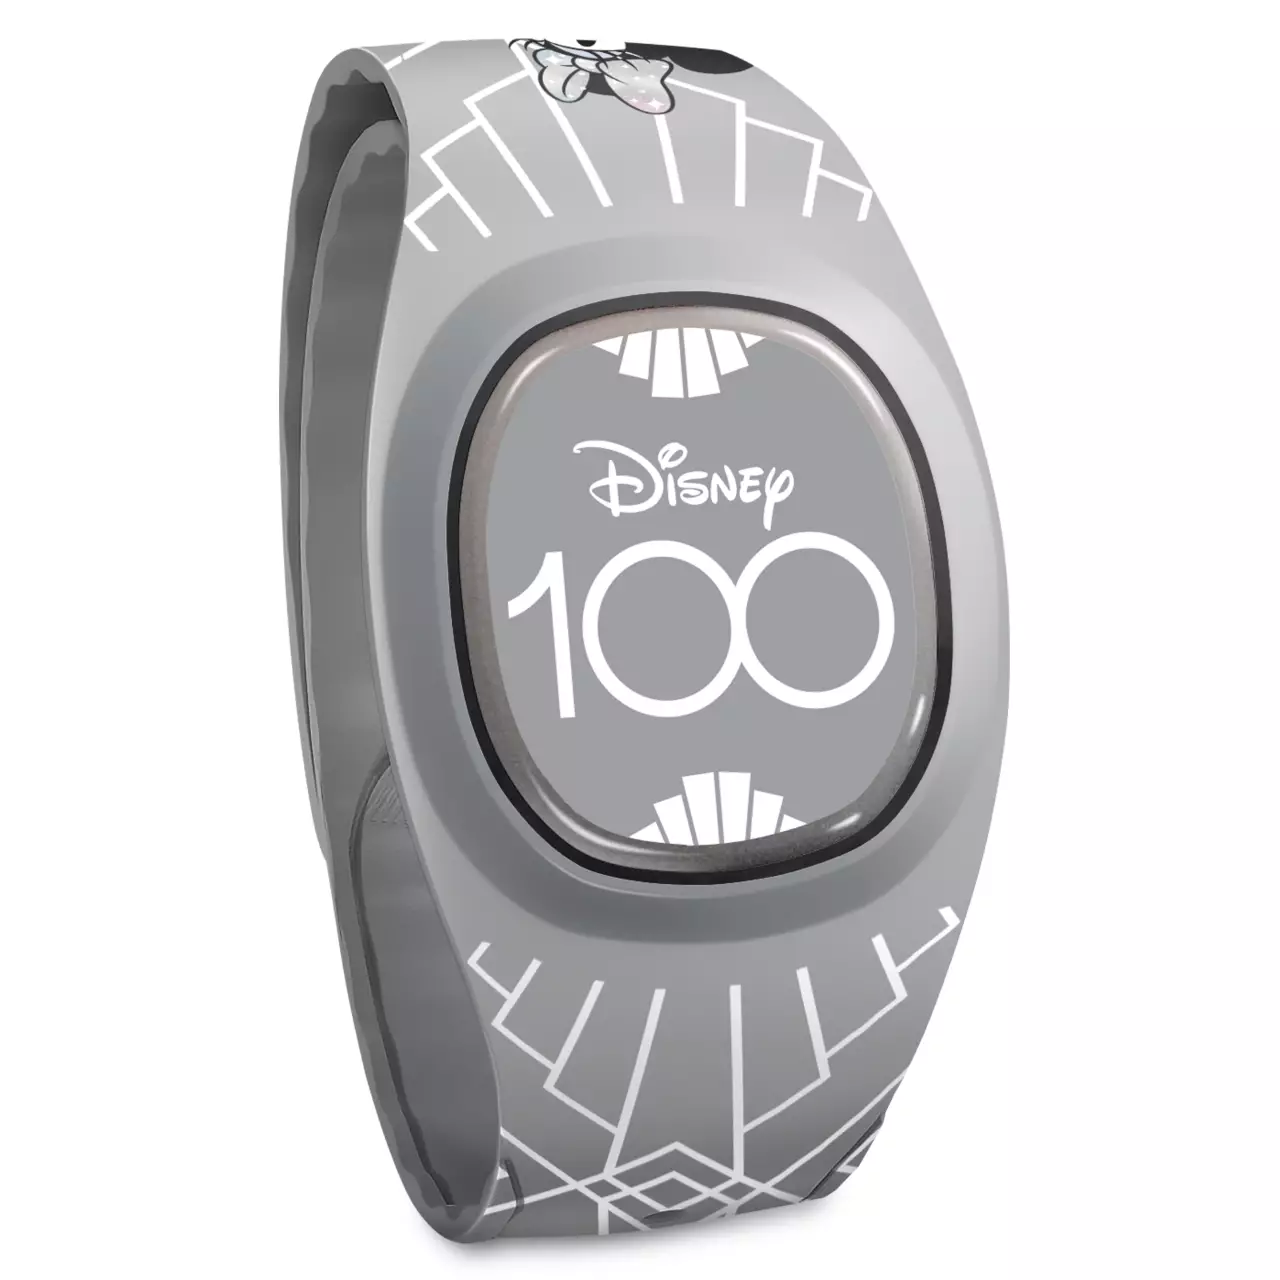 Mickey Mouse and Friends Disney100 MagicBand+